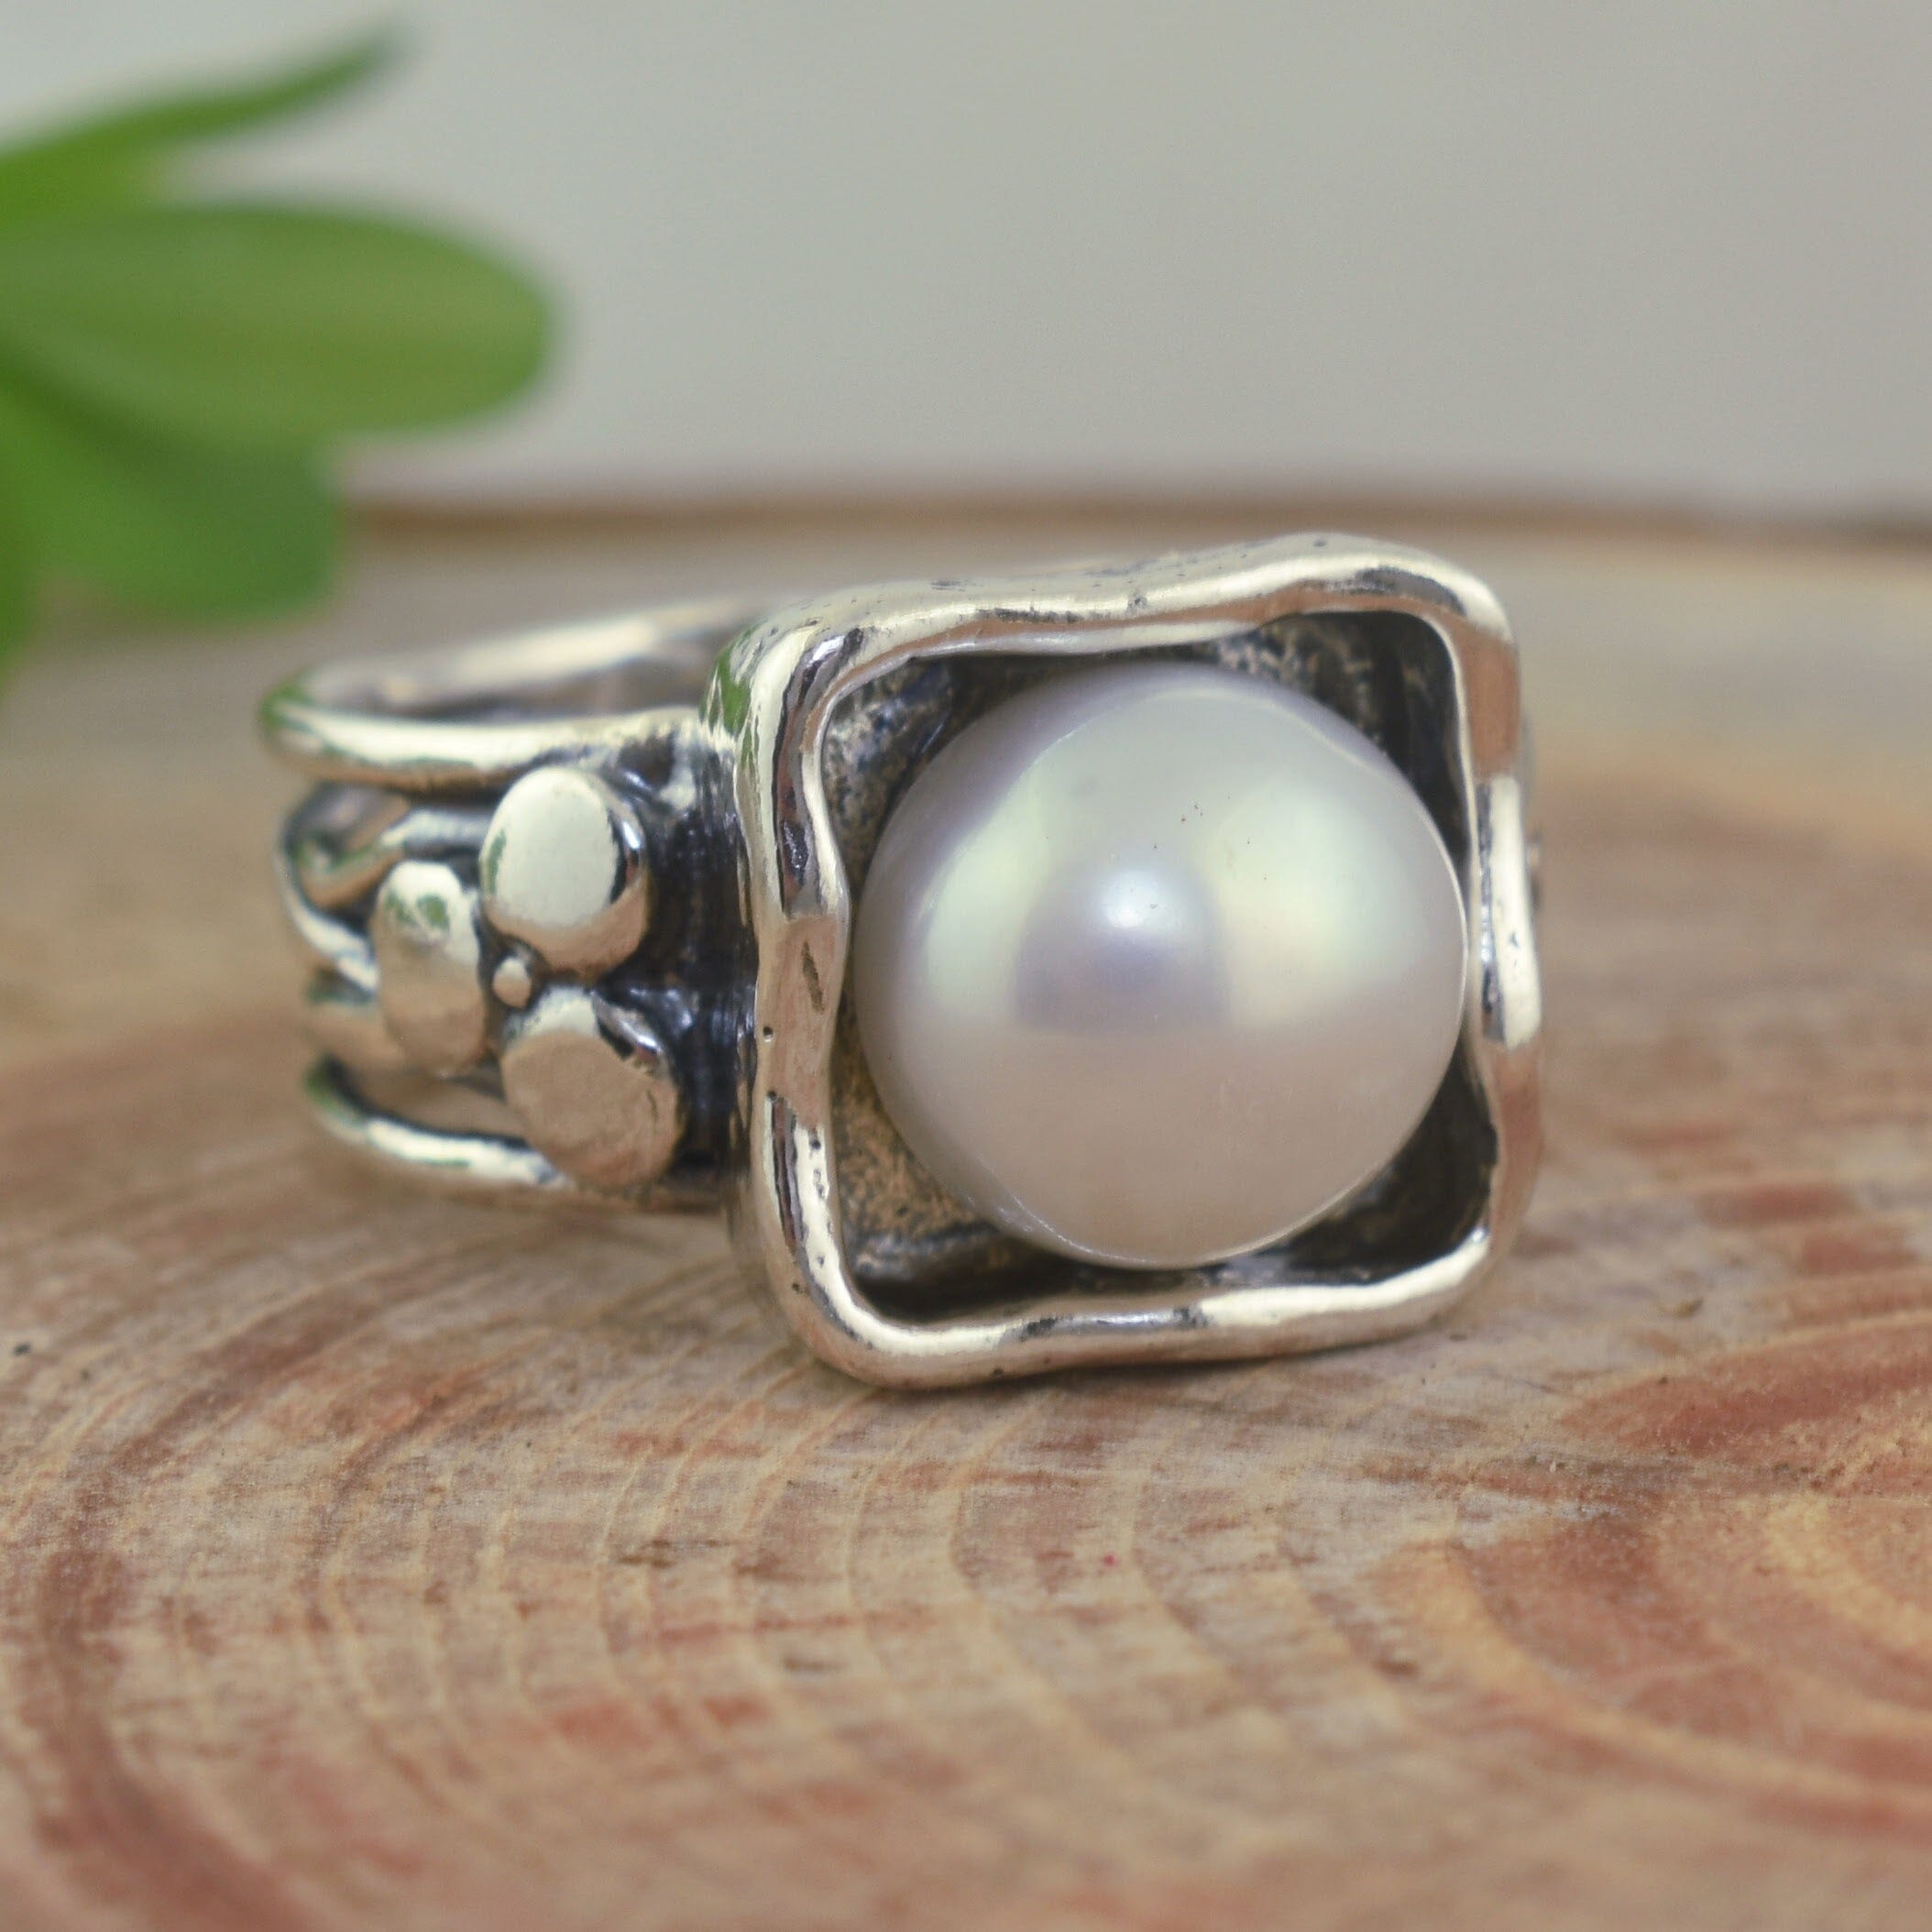 .925 sterling silver ring with large round freshwater pearl stone